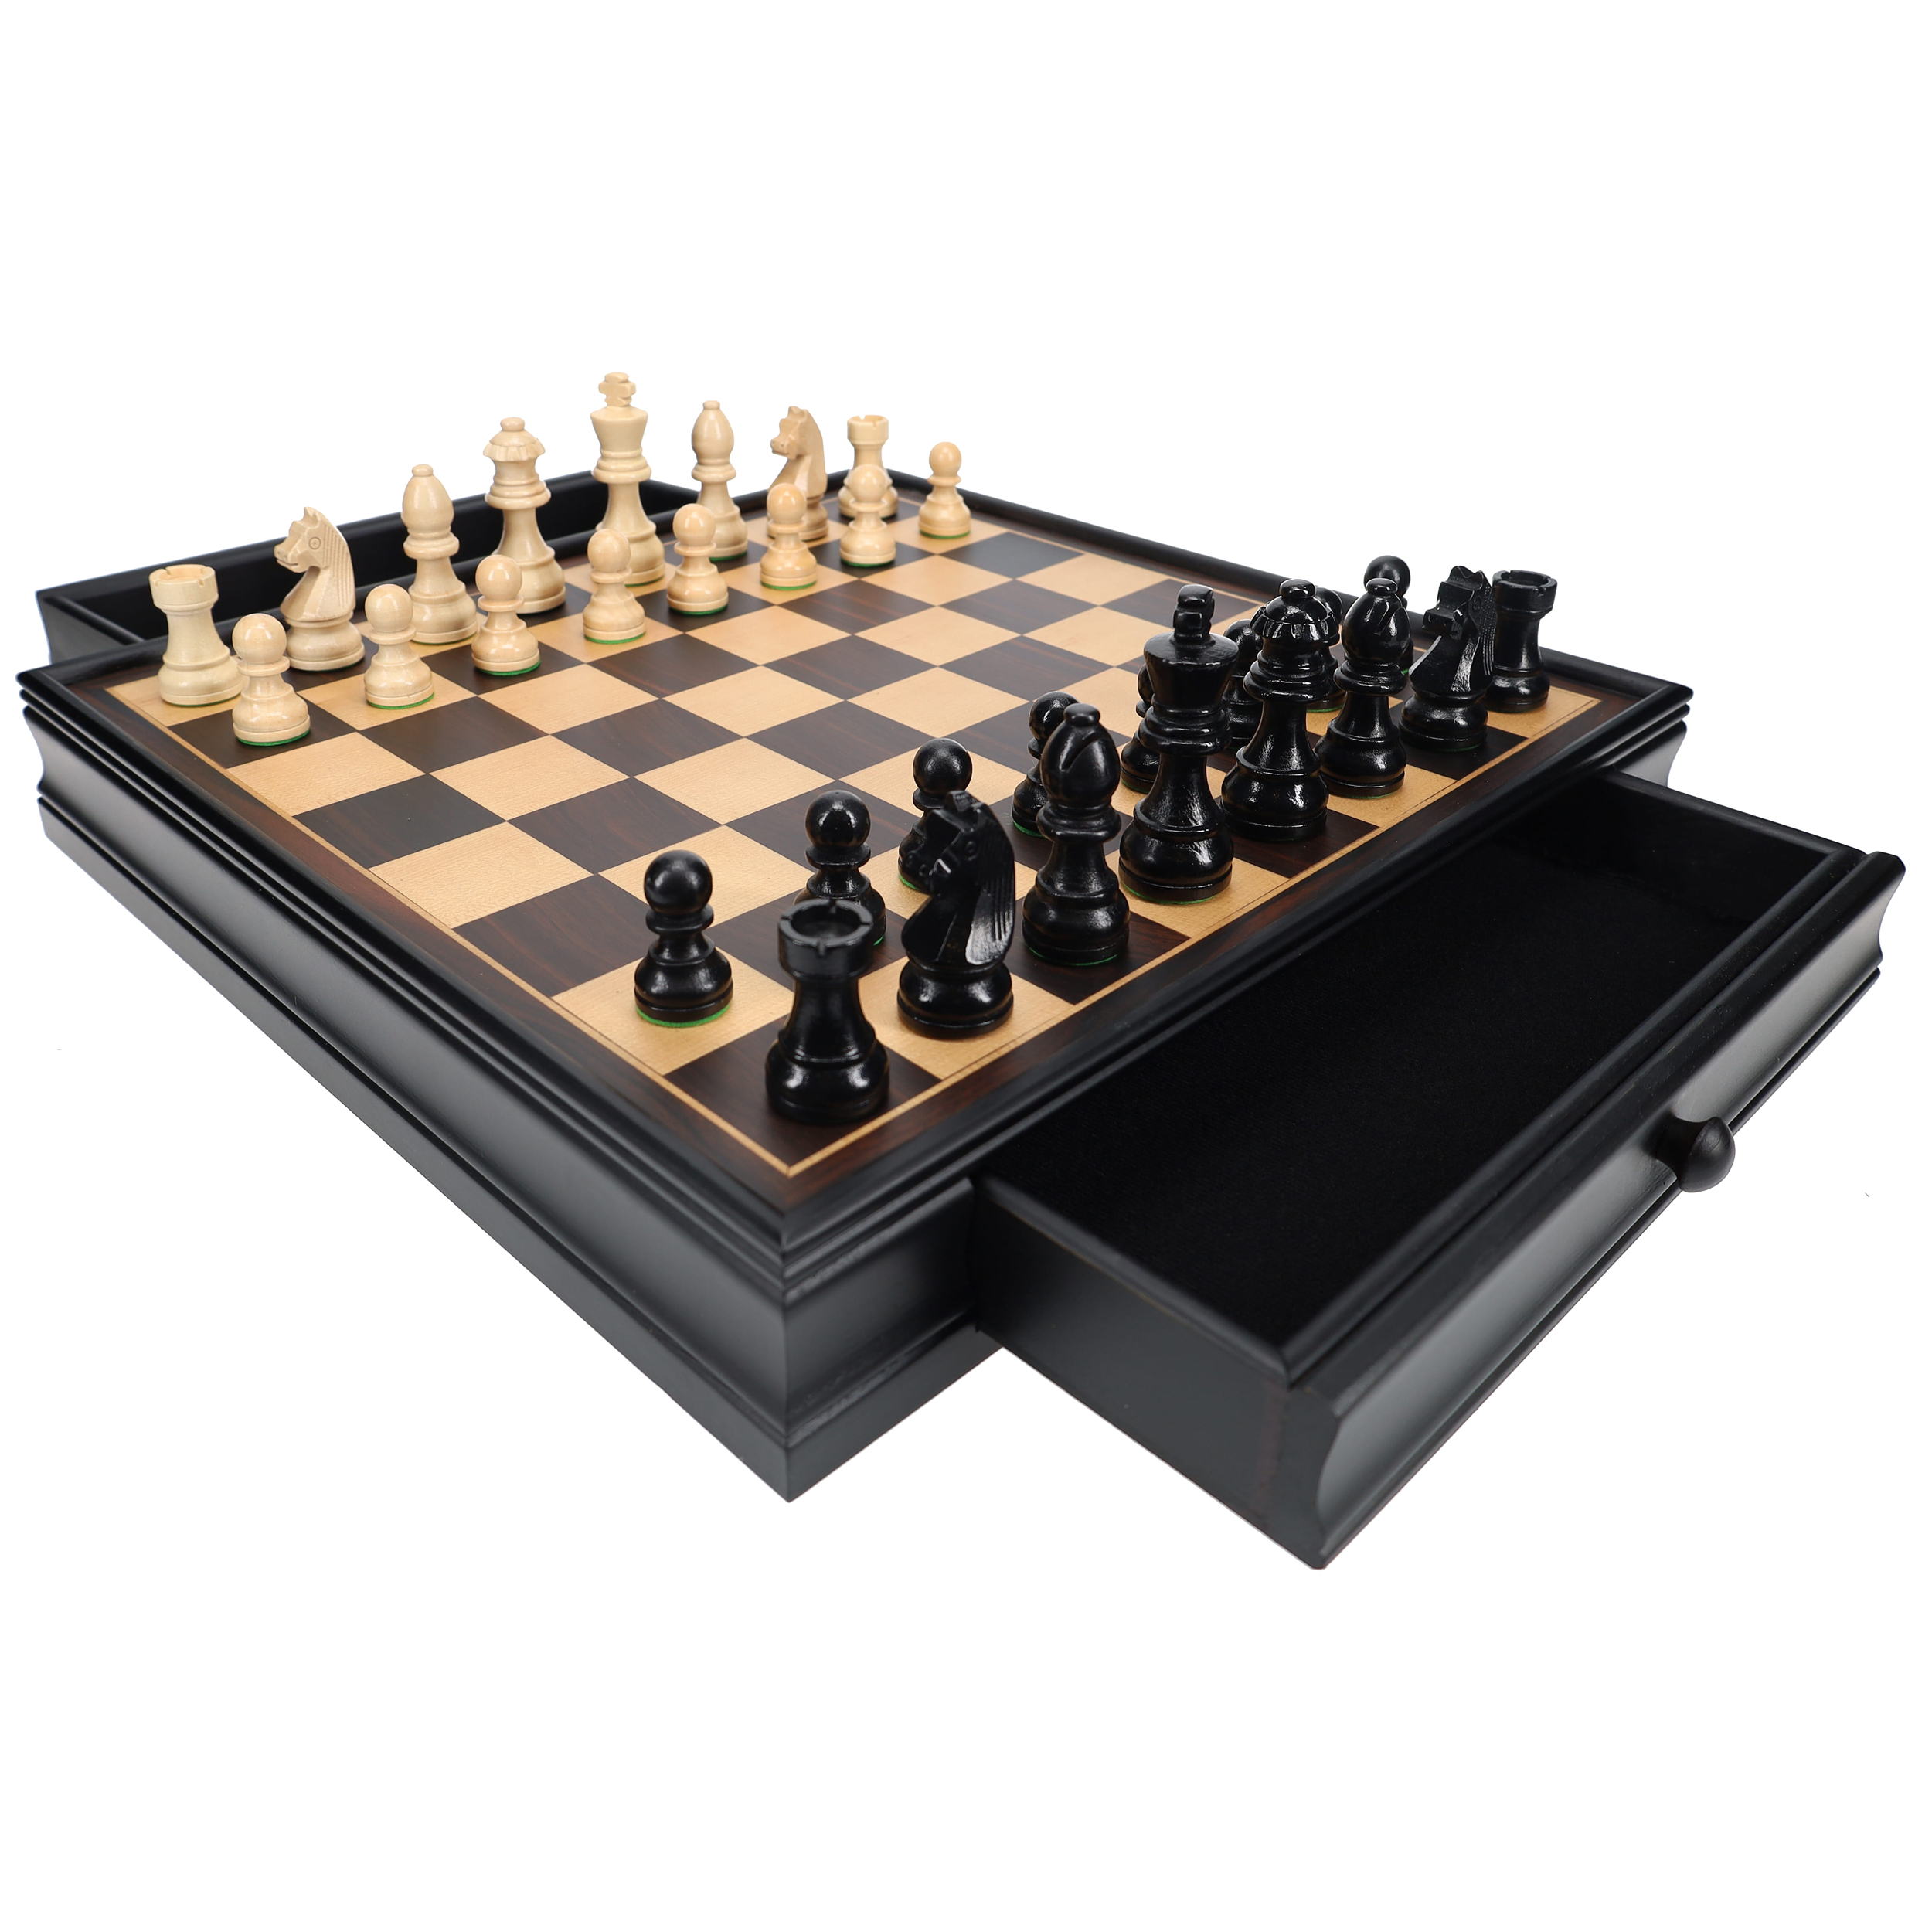 LARGE CHESS AND CHECKERS WOOD SET WITH DRAWER